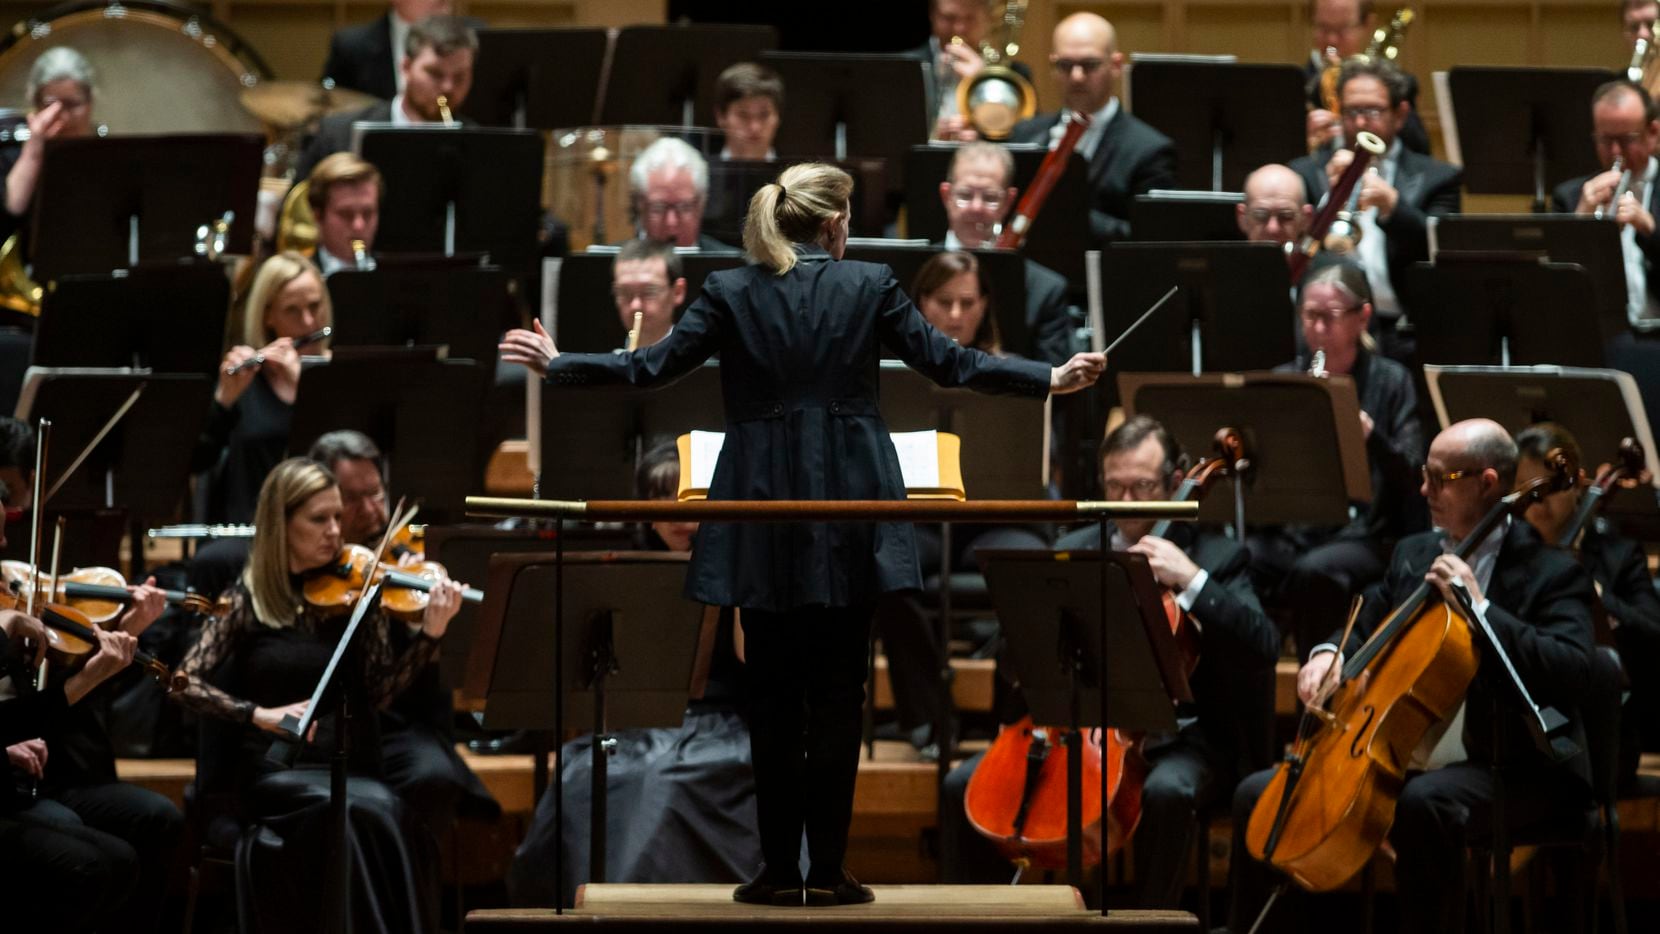 Principal guest conductor Gemma New leads the Dallas Symphony Orchestra at the Meyerson Symphony Center in Dallas, March 6, 2020.